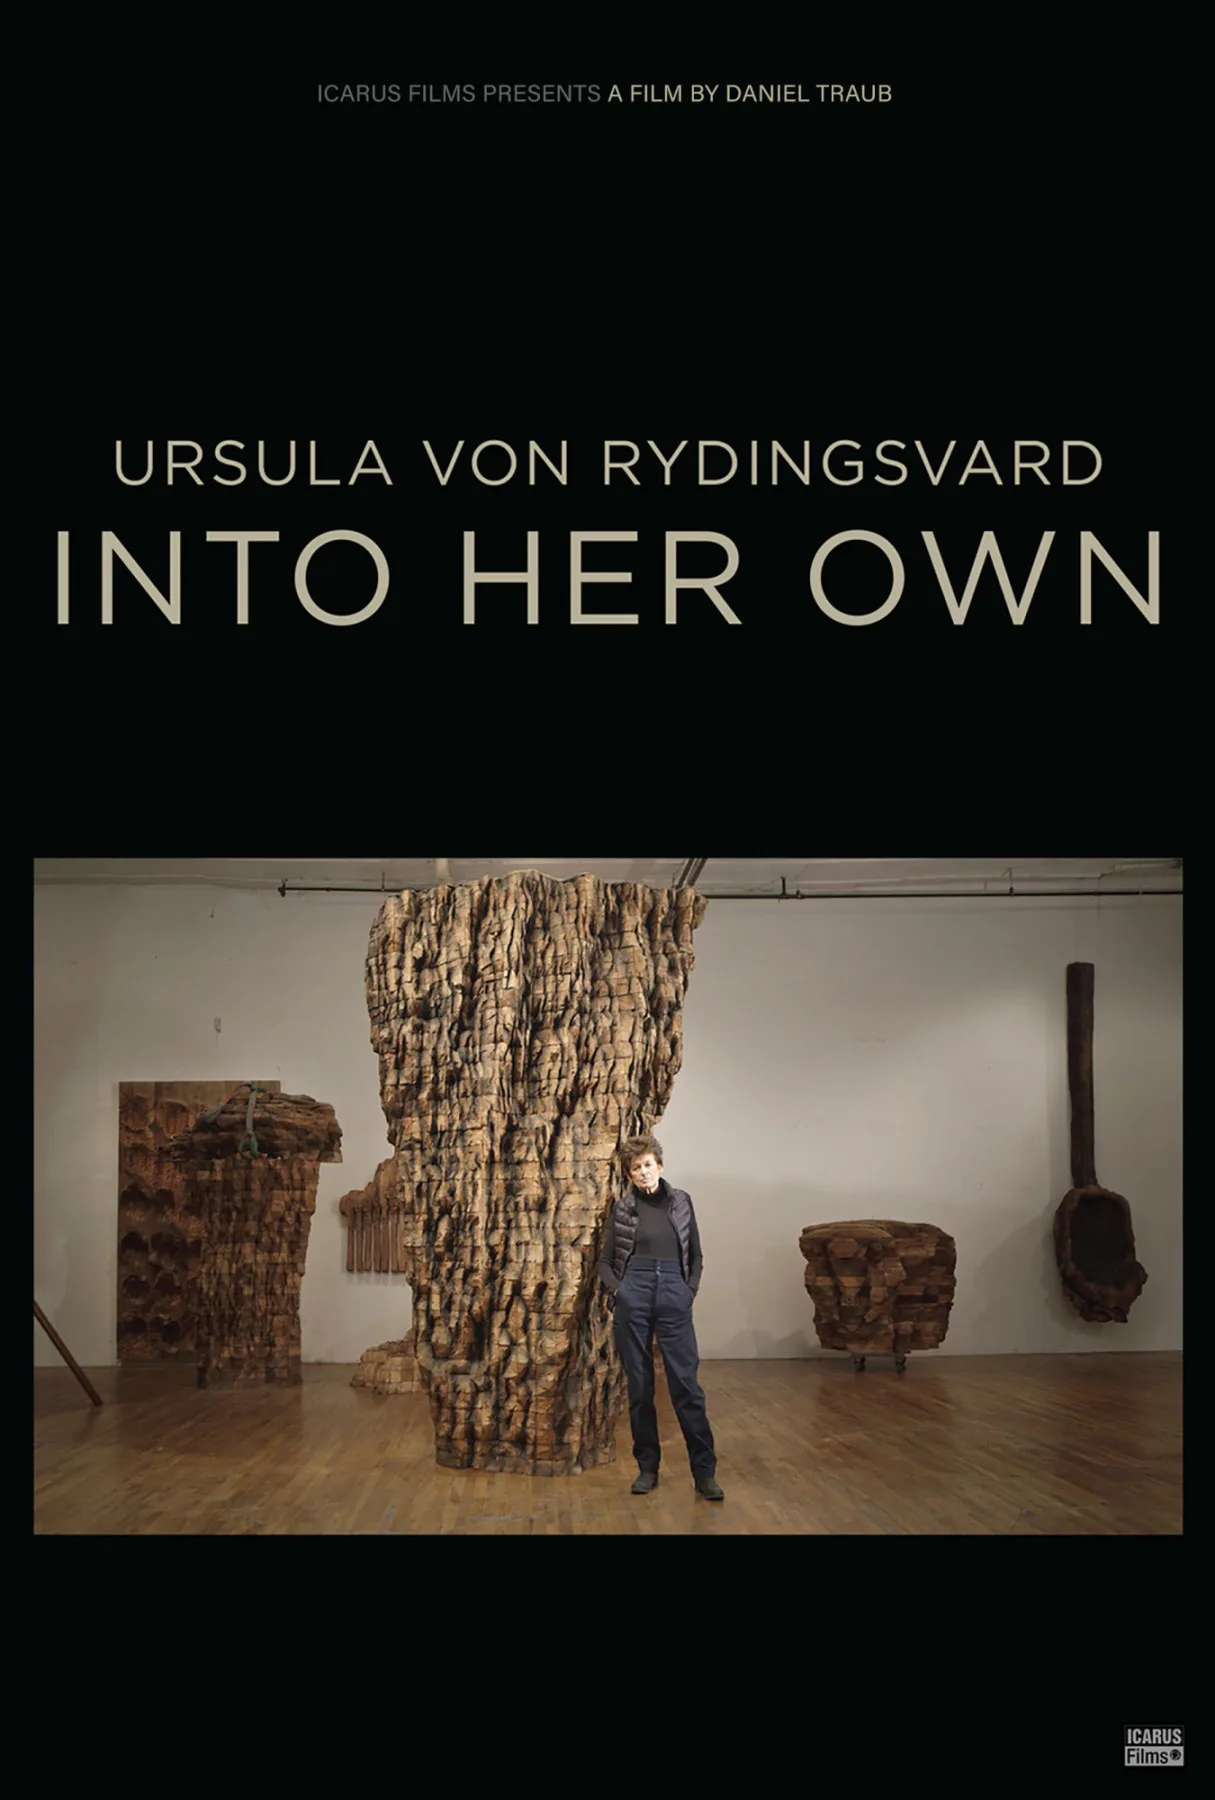 Icarus Films Presents A Film By Daniel Traub. Ursula von Rydingsvard. Into Her Own. Movie poster shows Ursula von Rydingsvard in front of artwork.